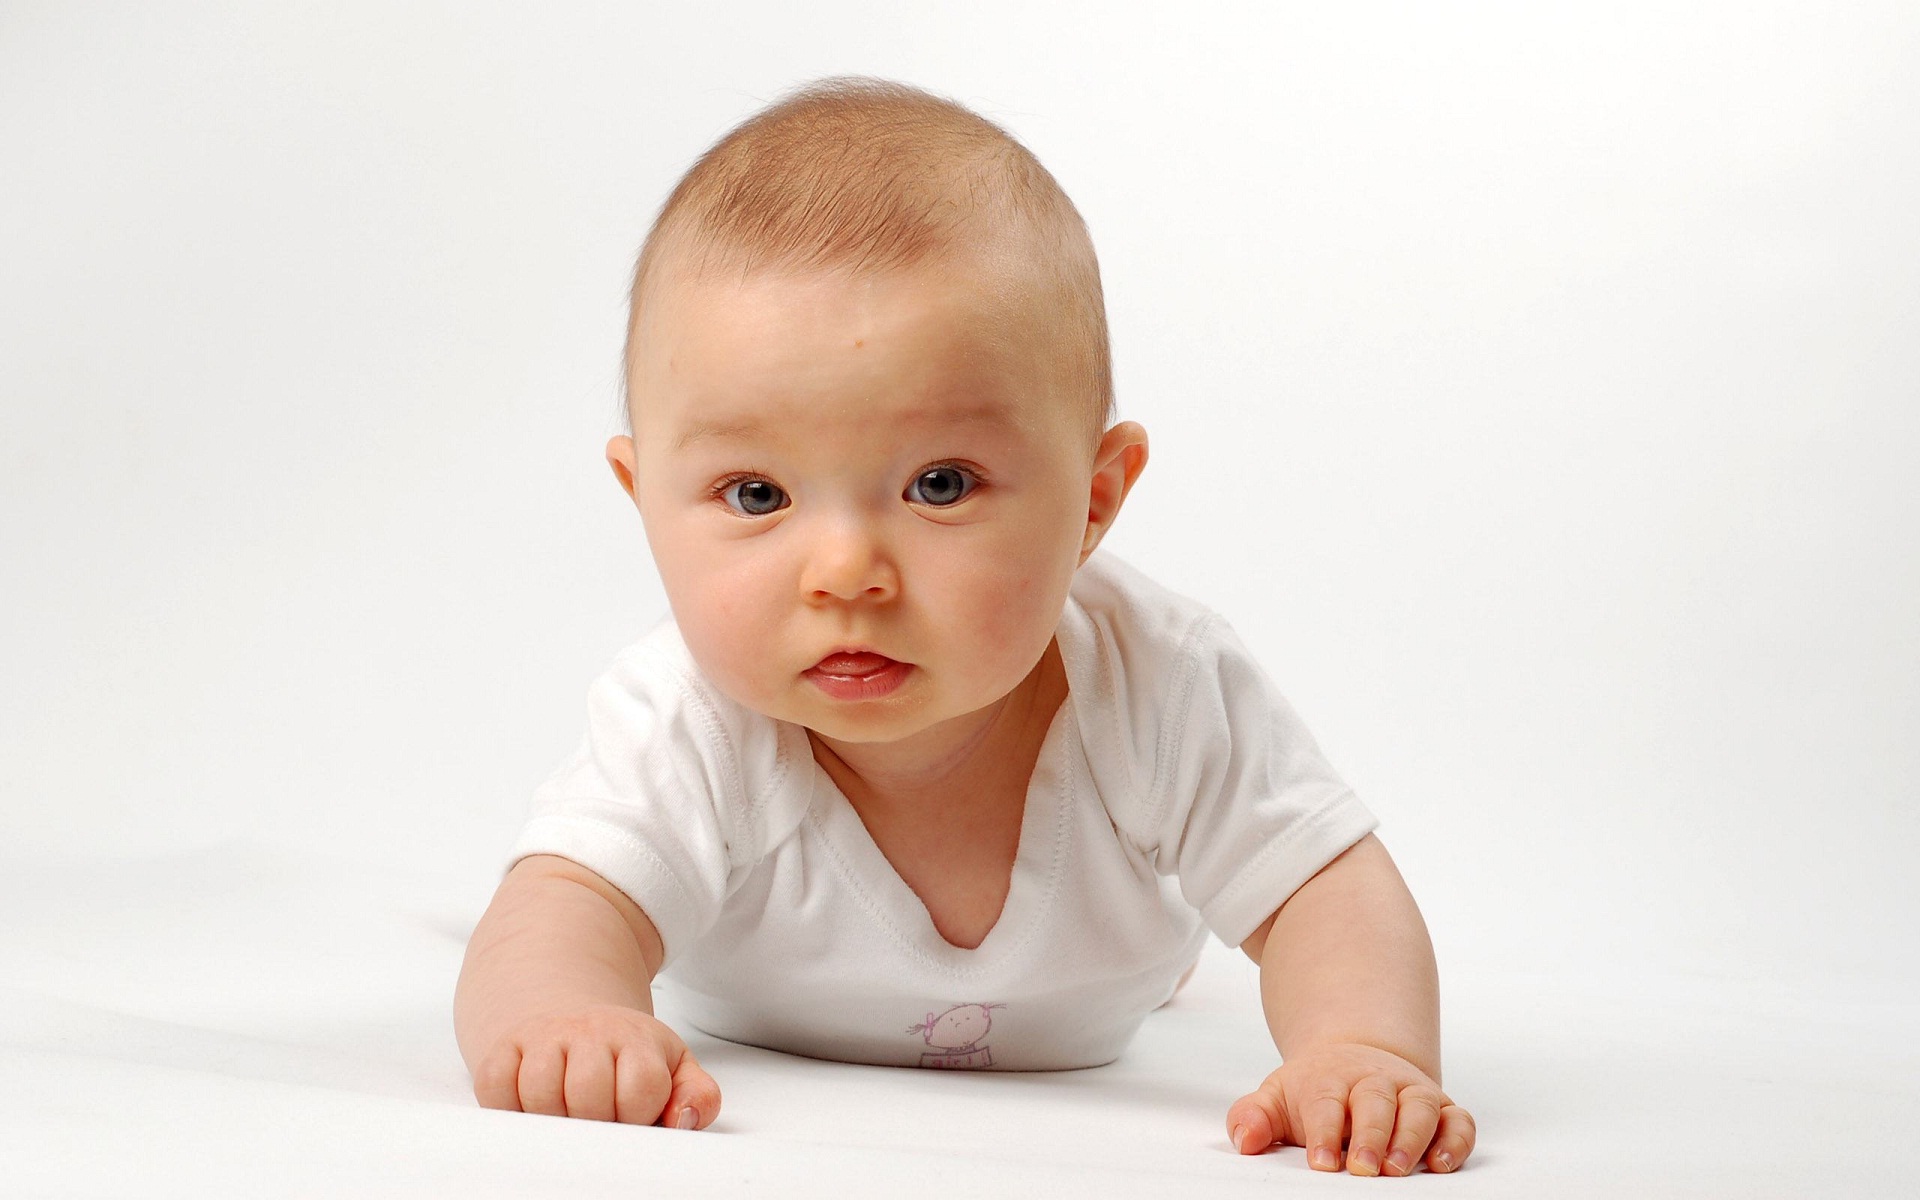 Very Small Kid Nice Wallpapers And Backgrounds - Crawling Baby Good Resolution - HD Wallpaper 